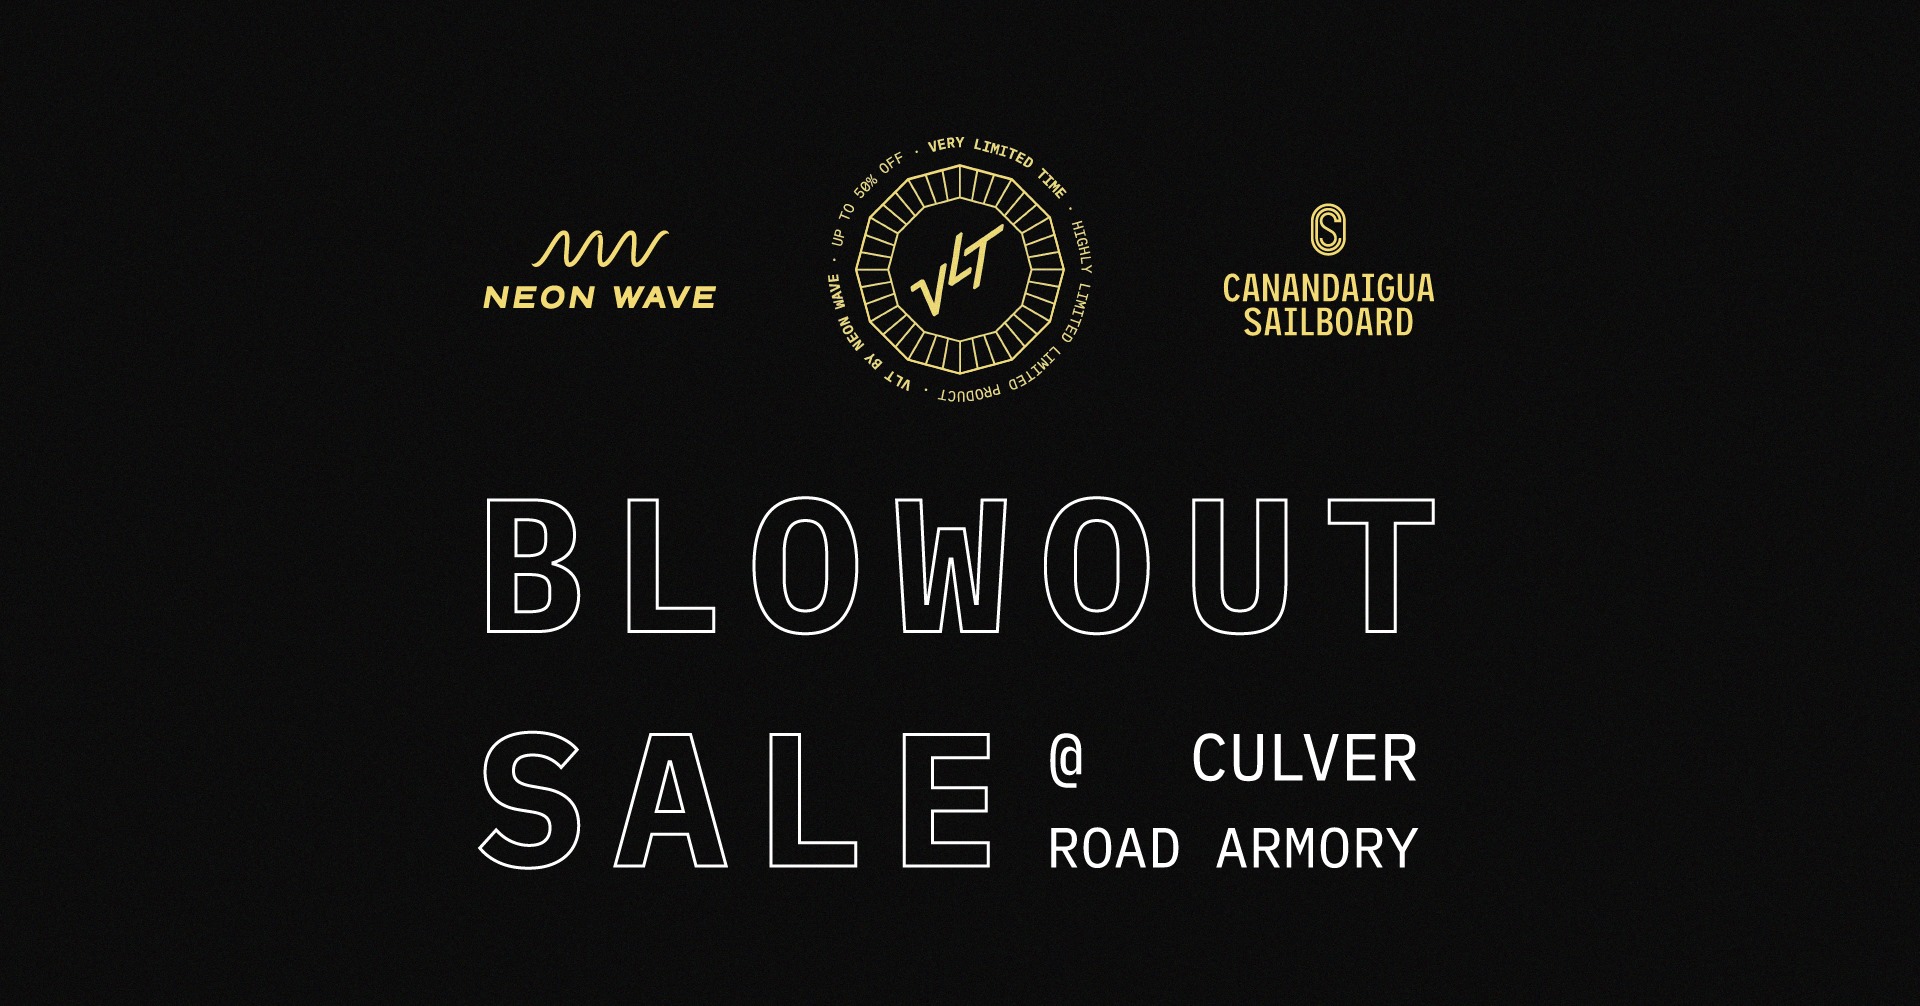 VLT Blowout Sale by Neon Wave and Canandaigua Sailboard Event Image